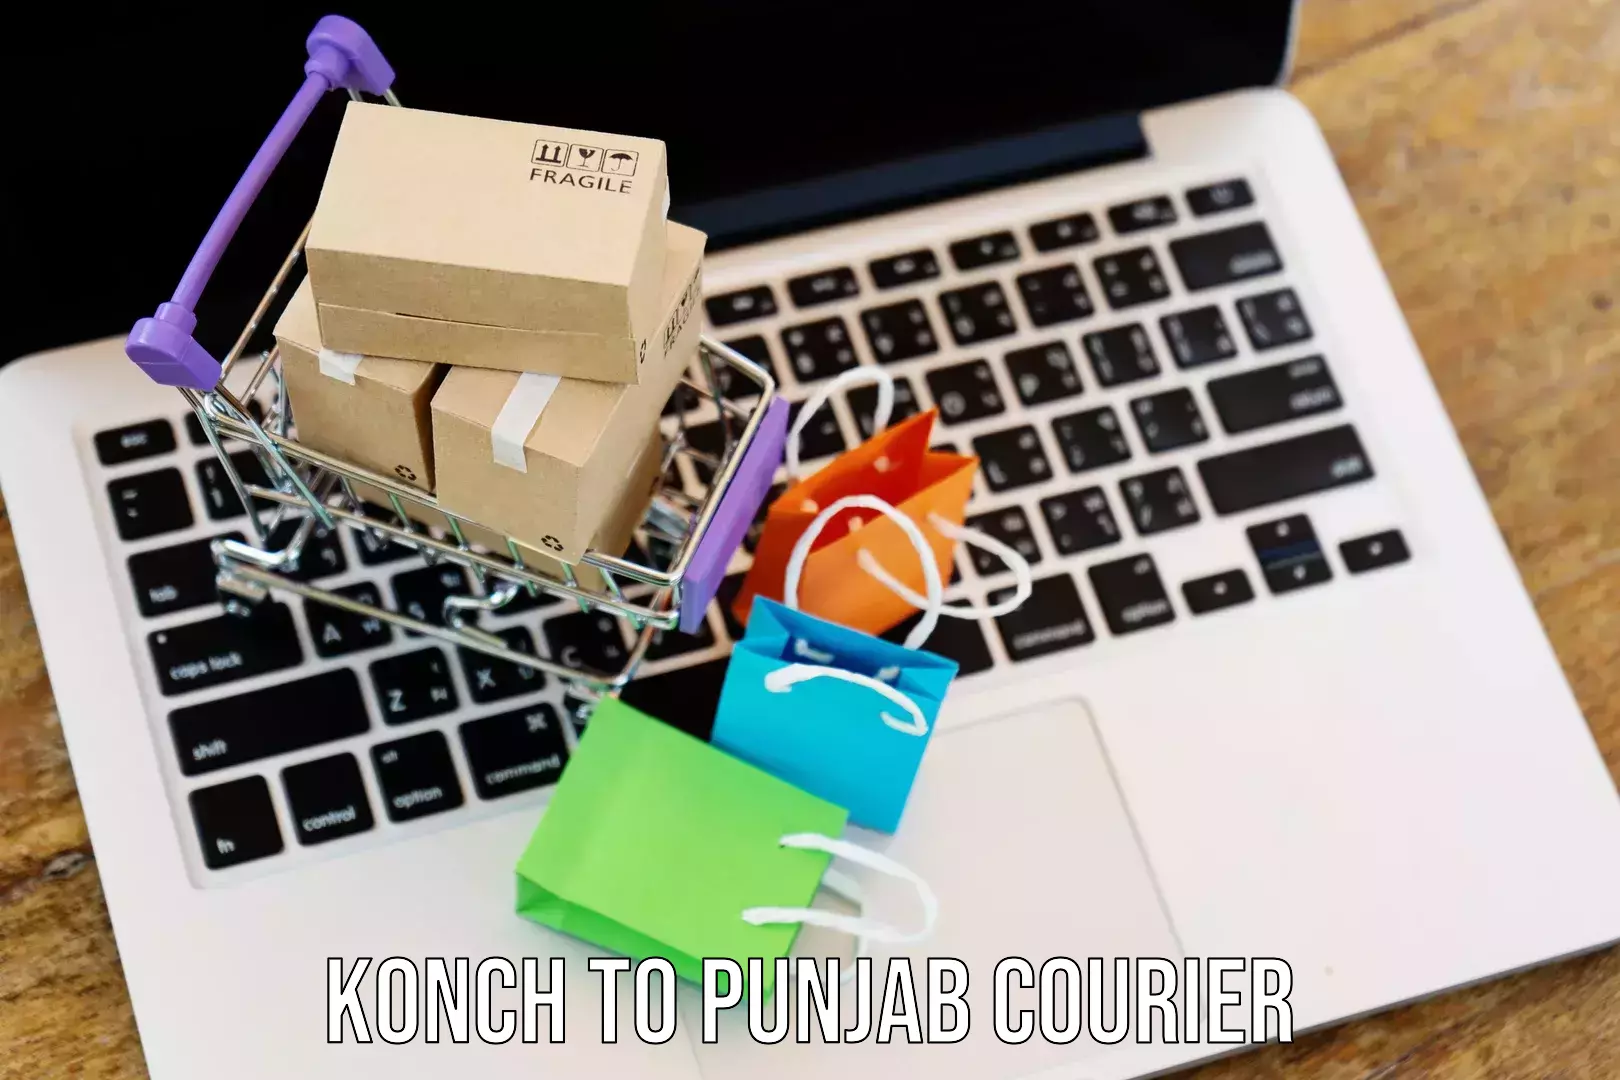 Air courier services Konch to Anandpur Sahib